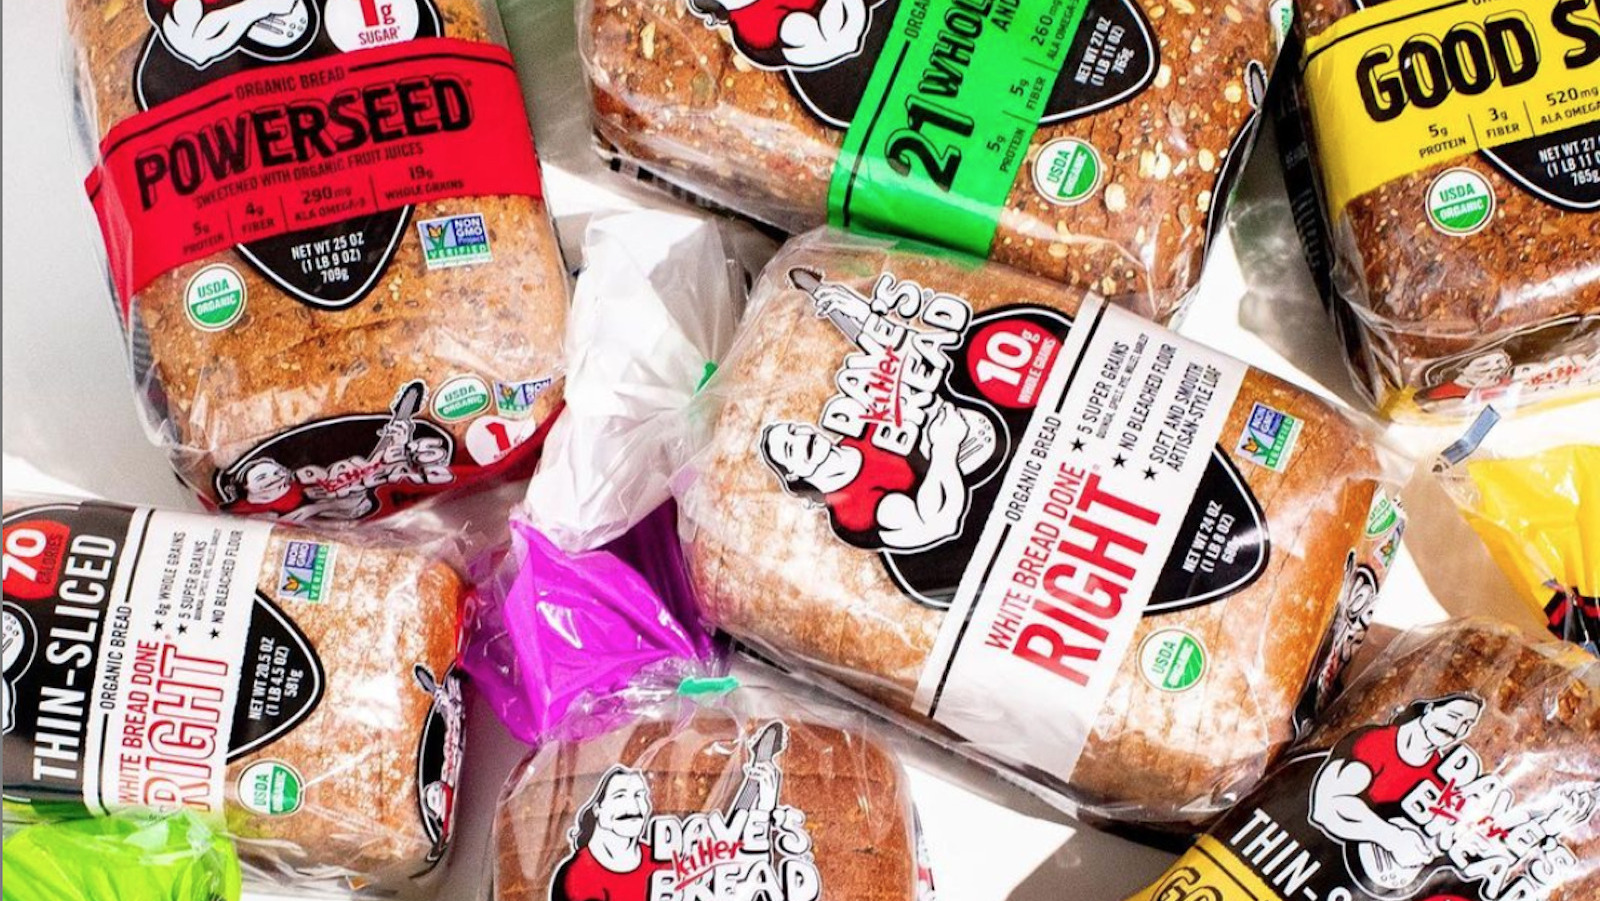 Is Dave's Killer bread equal to Ezekiel bread? - Foodly